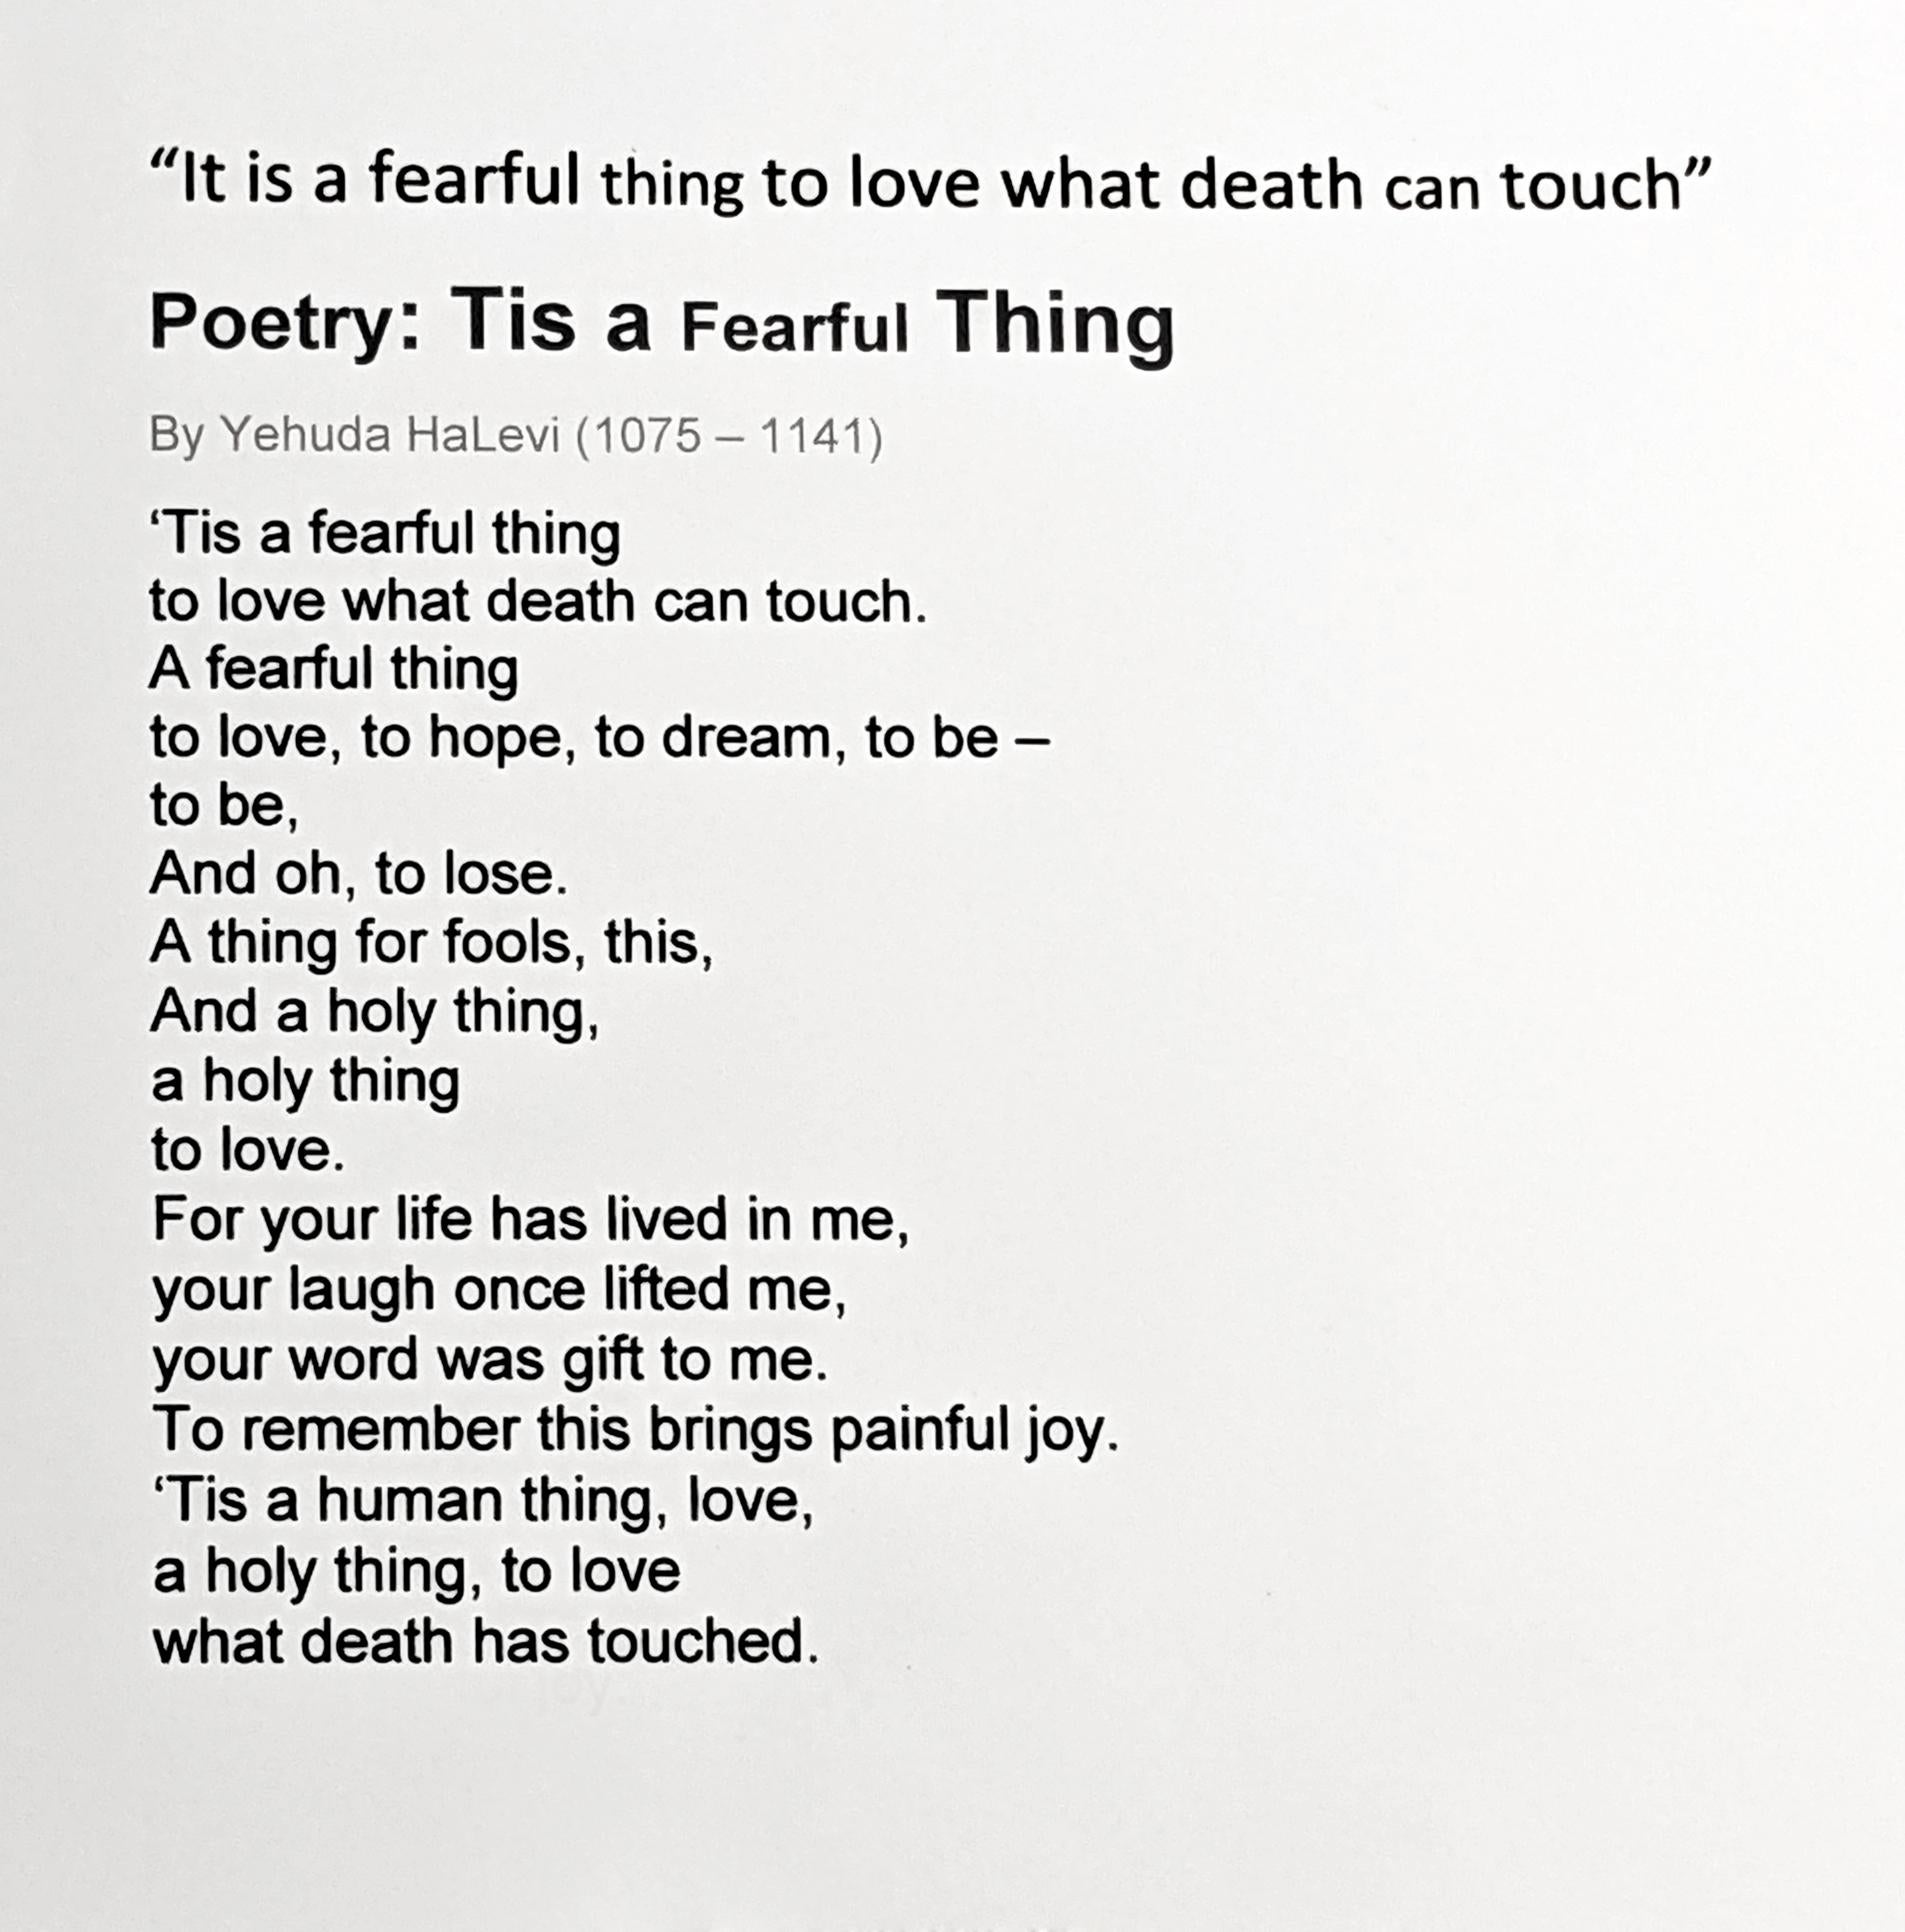 tis a fearful thing to love what death can touch